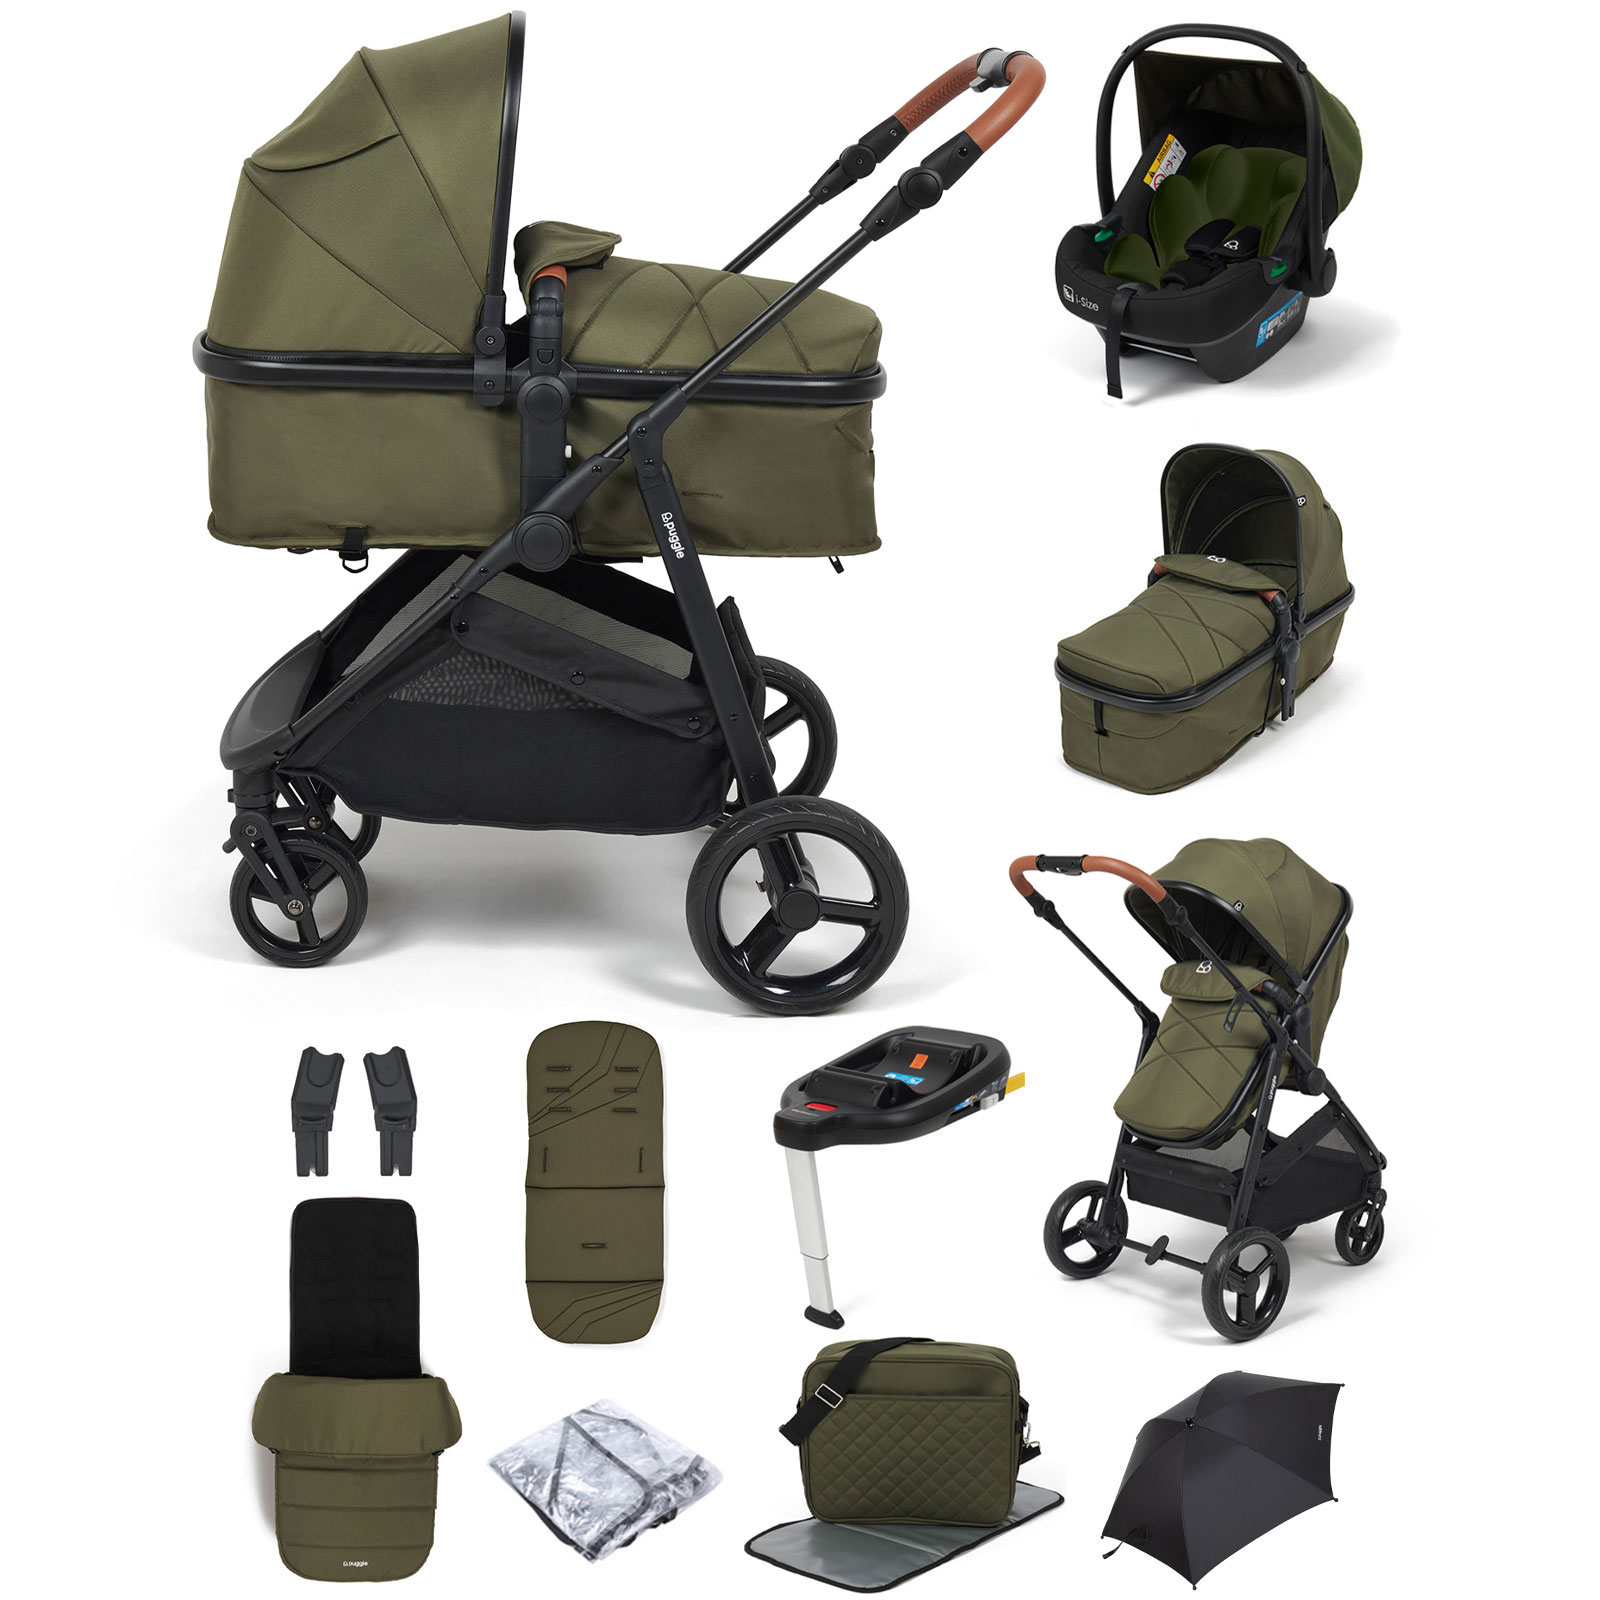 Puggle Monaco XT 2in1 i-Size Travel System with Base, Footmuff, Changing Bag & Parasol - Forest Green